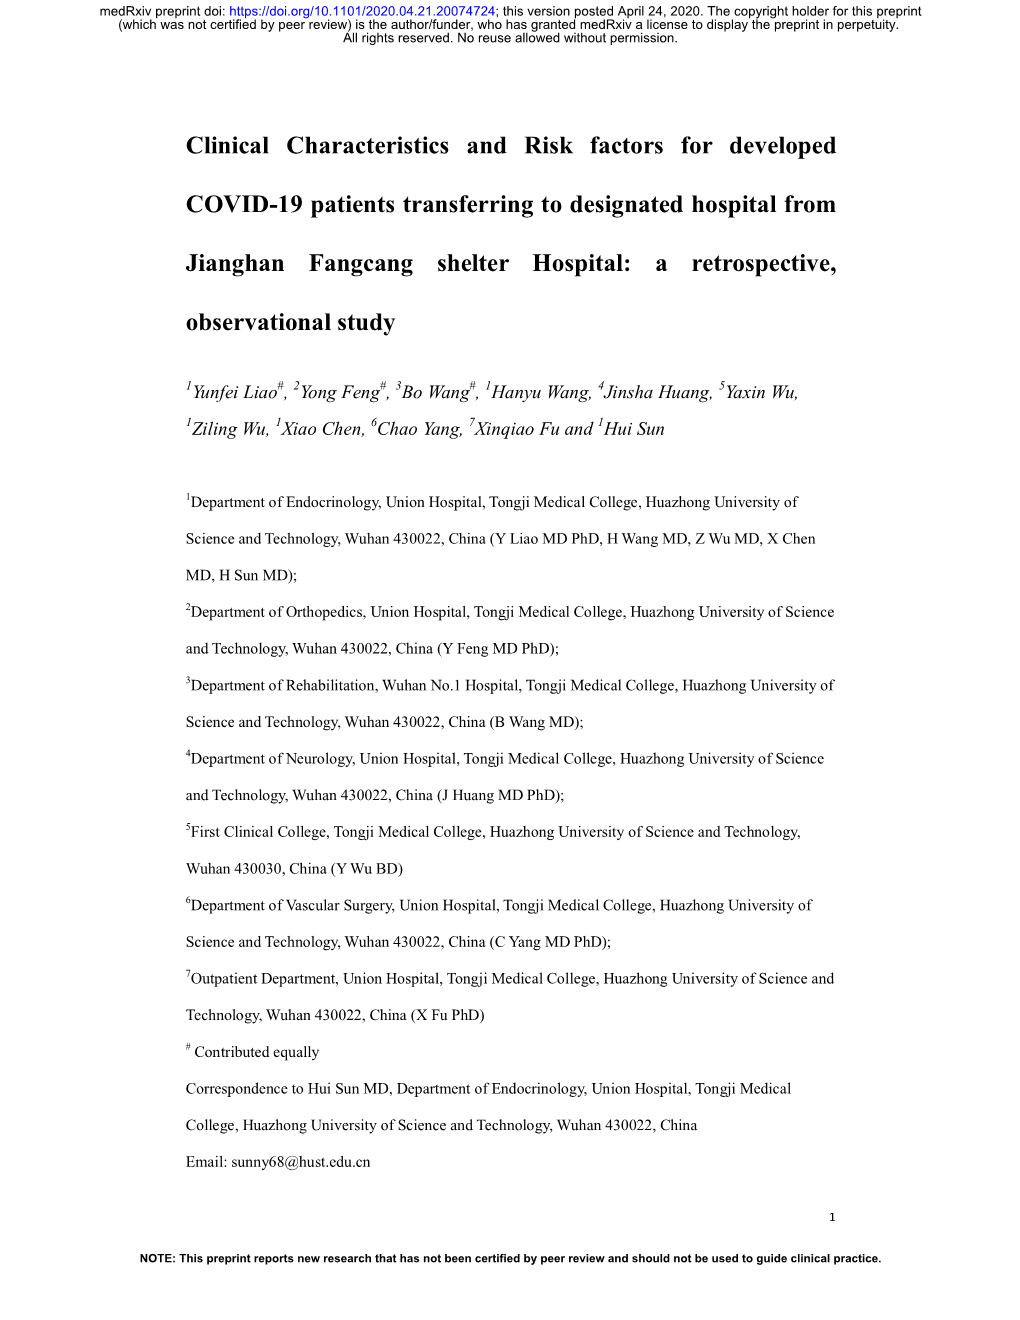 Clinical Characteristics and Risk Factors for Developed COVID-19 Patients Transferring to Designated Hospital from Jianghan Fang